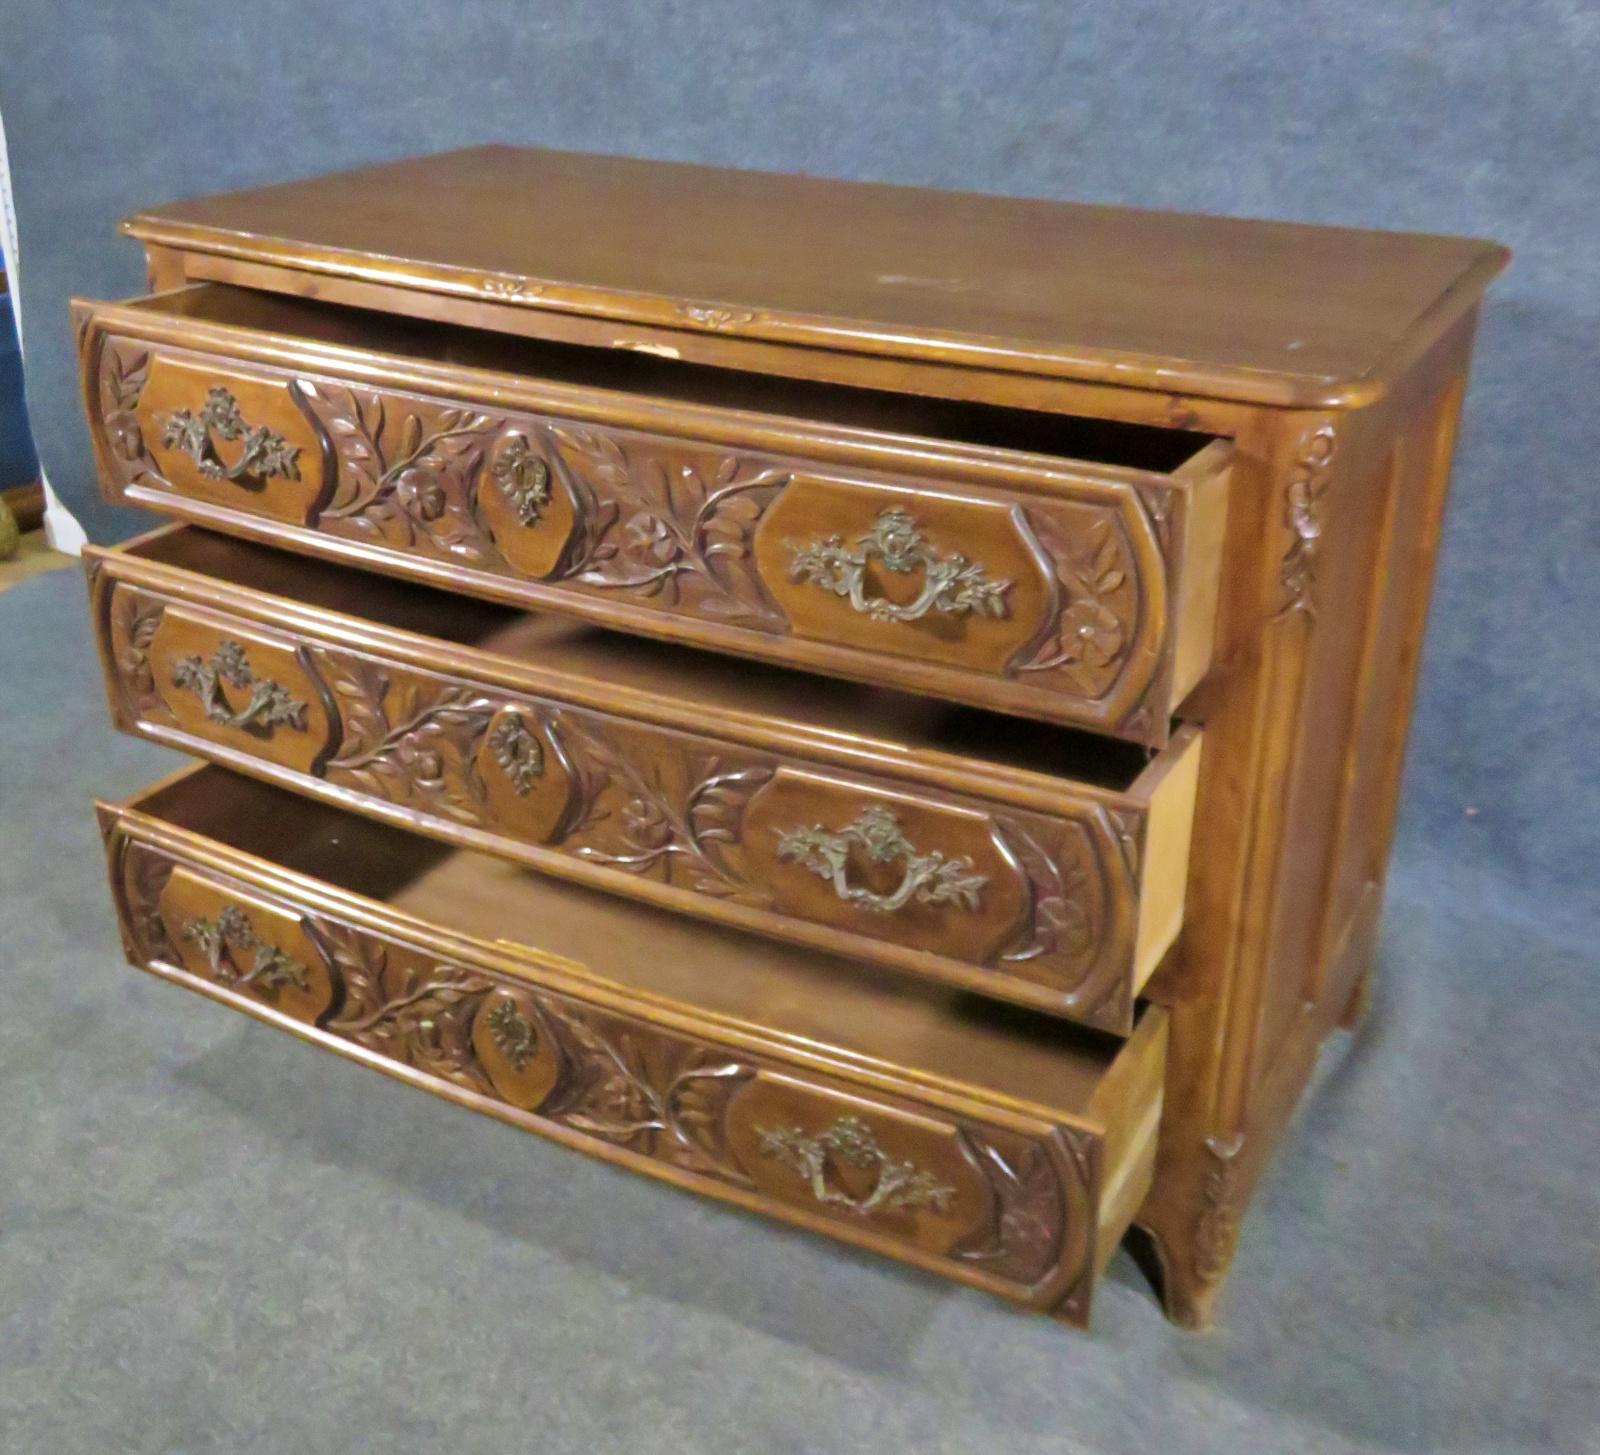 French Provincial Carved Walnut Floral French Louis XV Style Commode Dresser For Sale